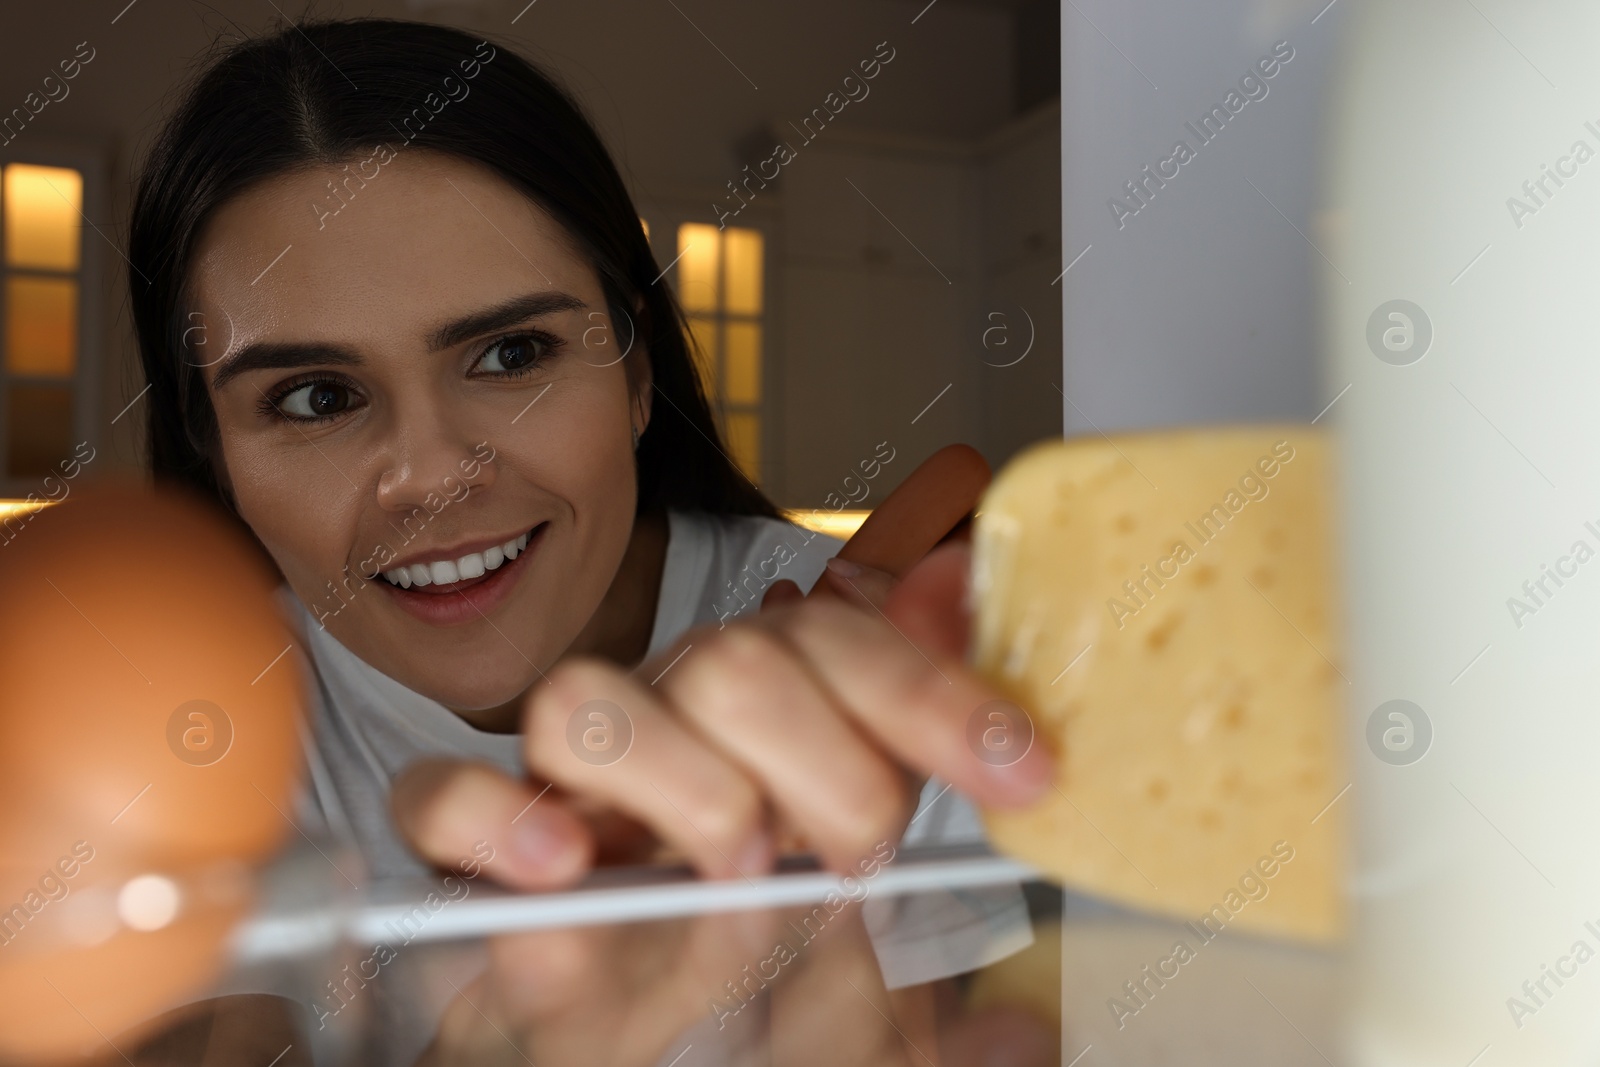 Photo of Young woman taking cheese out of refrigerator in kitchen at night, view from inside